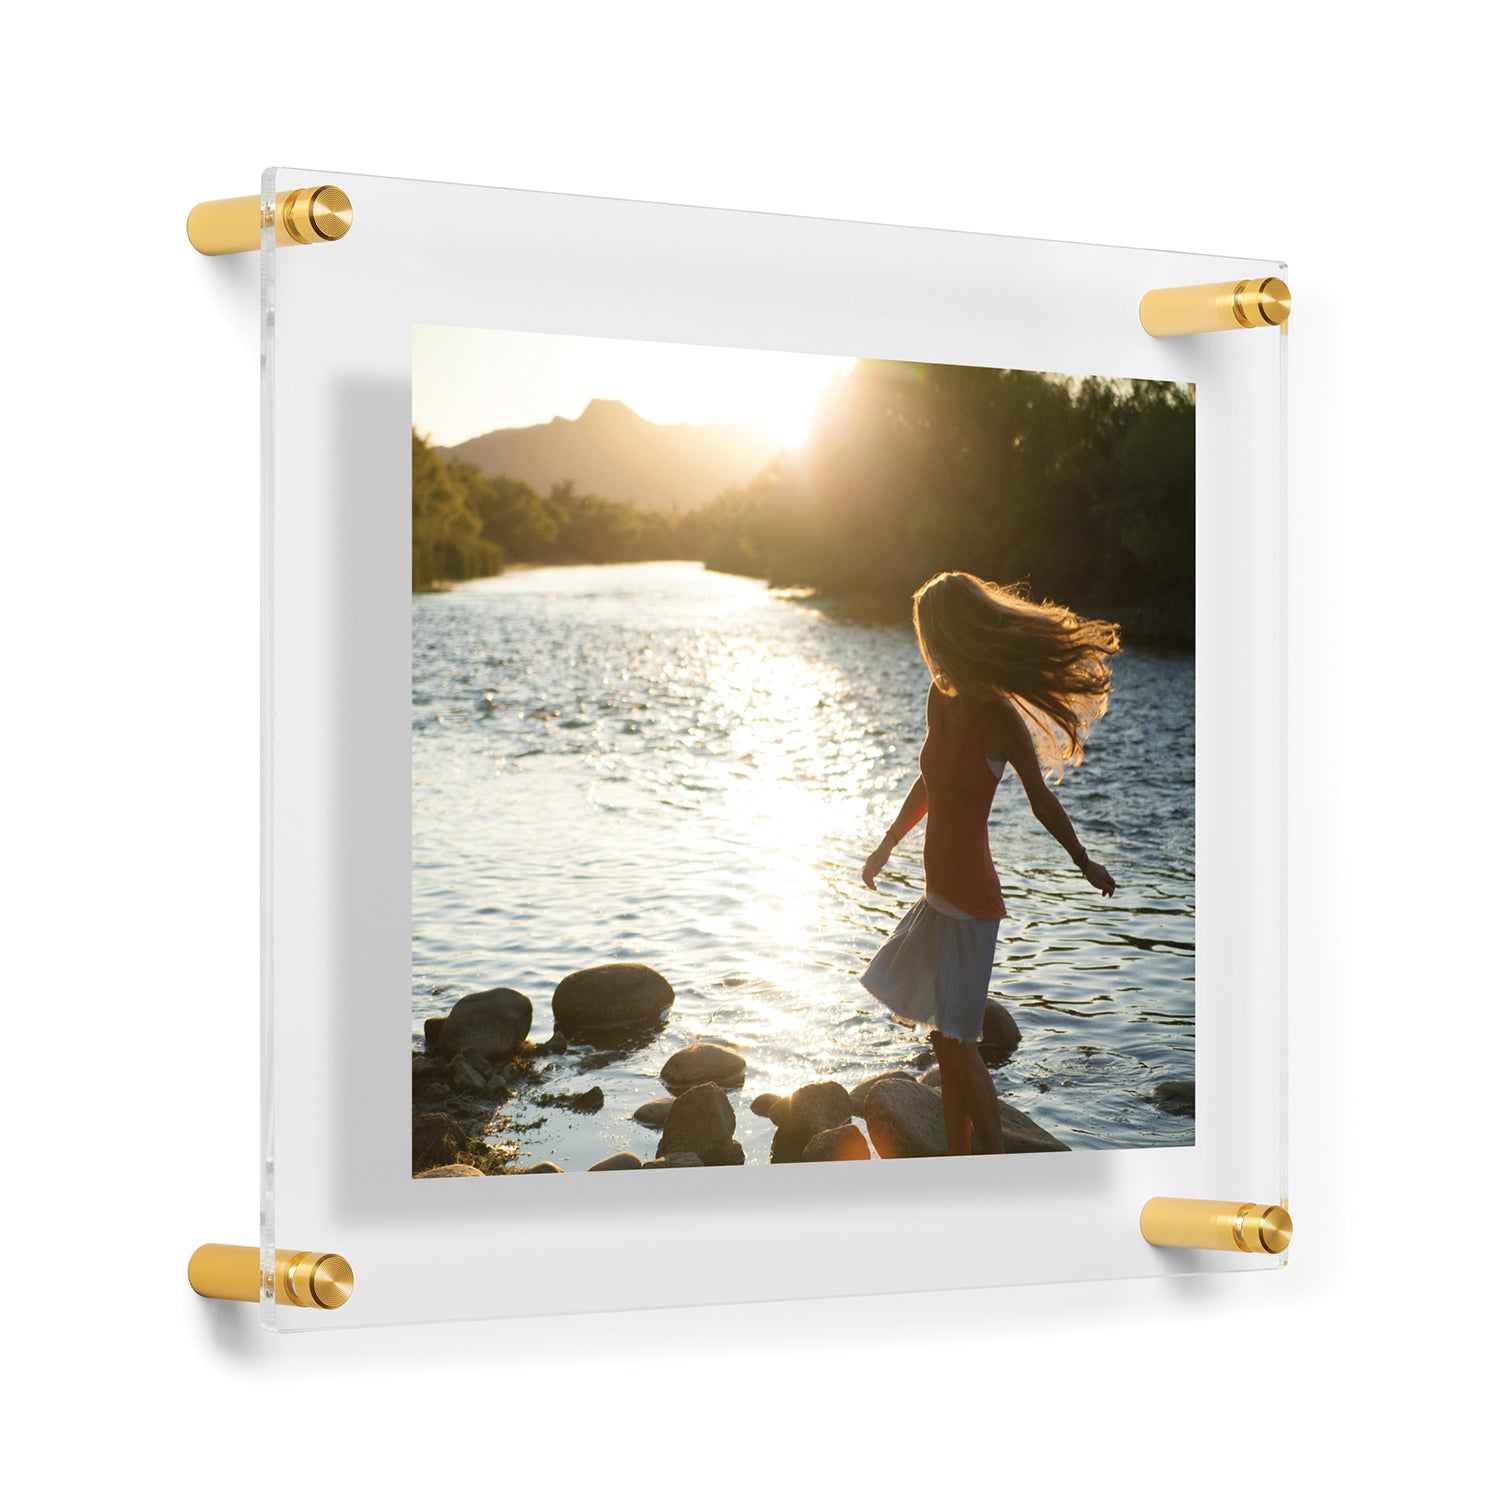 6x10 Frame White Wash Picture Frame - Complete Modern Photo Frame Includes  UV Acrylic Shatter Guard Front, Acid Free Foam Backing Board, Hanging